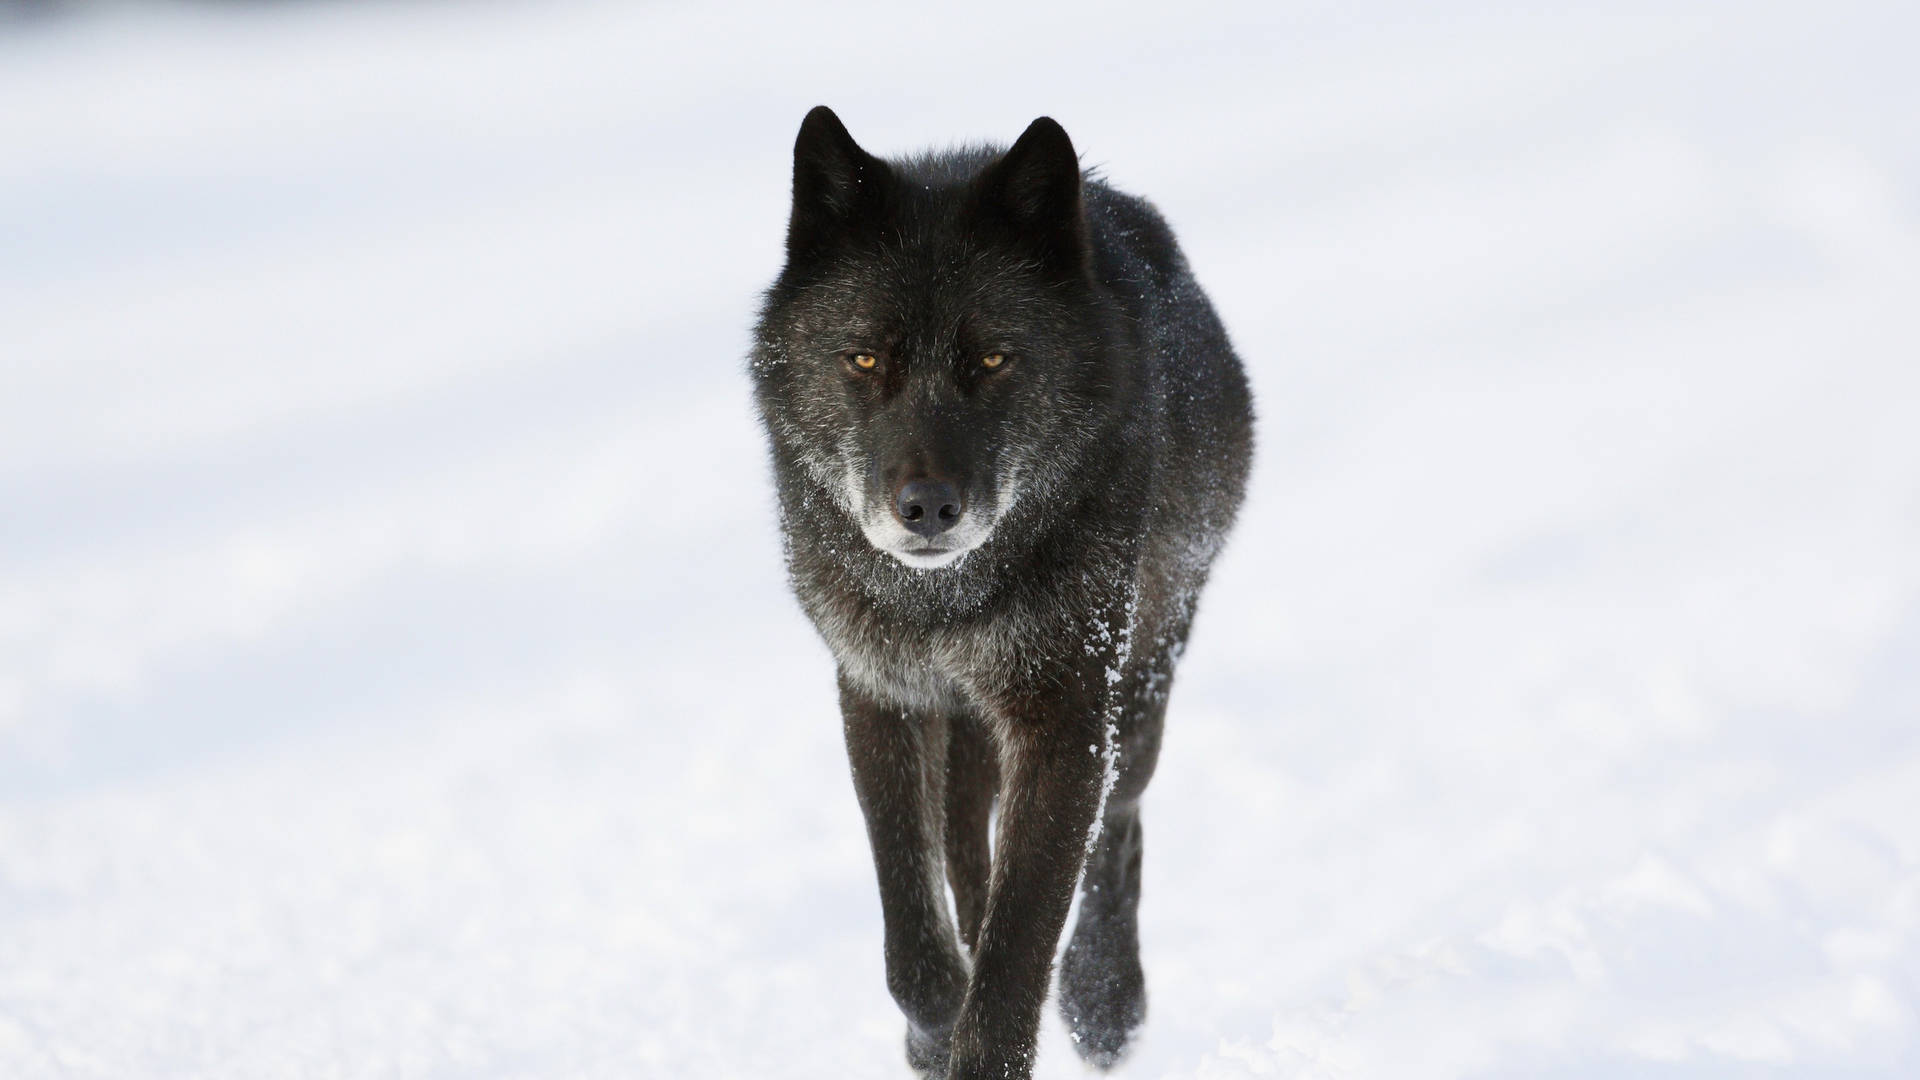 Cool Black Wolf Walking On Snow Background